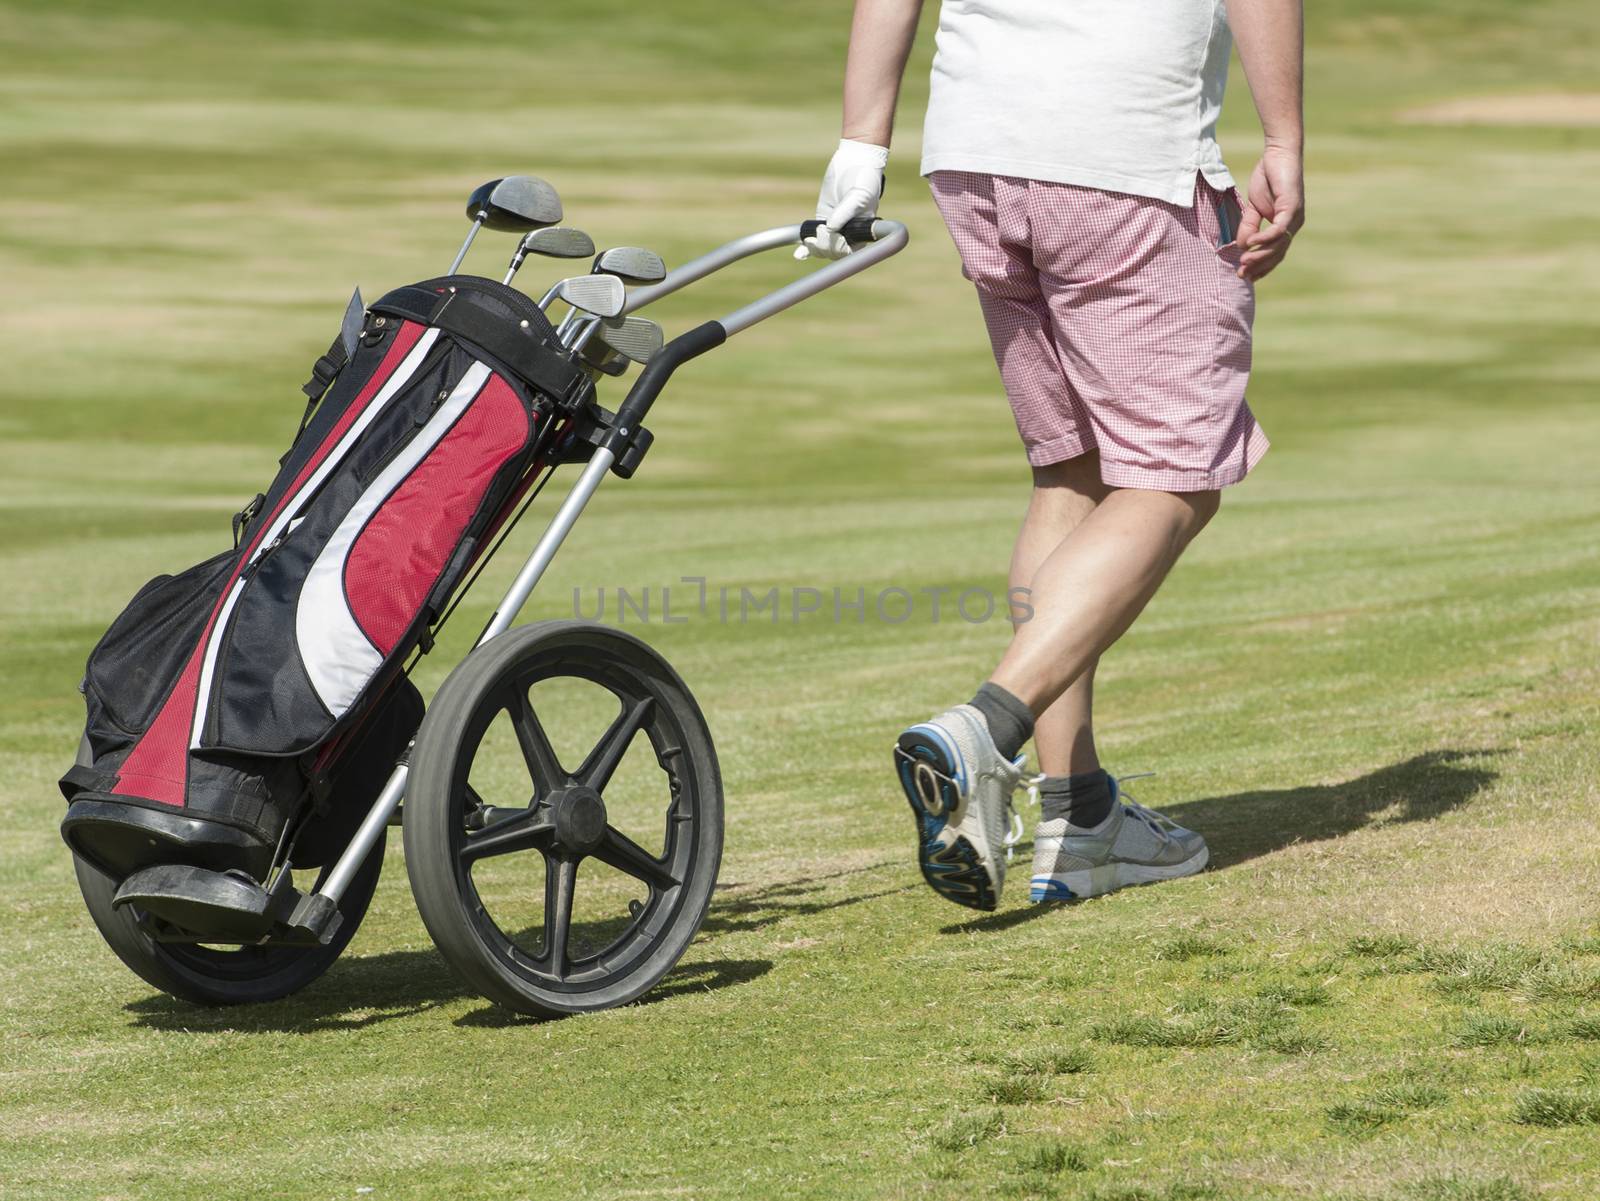 Golfer walking down the fairway on a course with golf bag and trolley